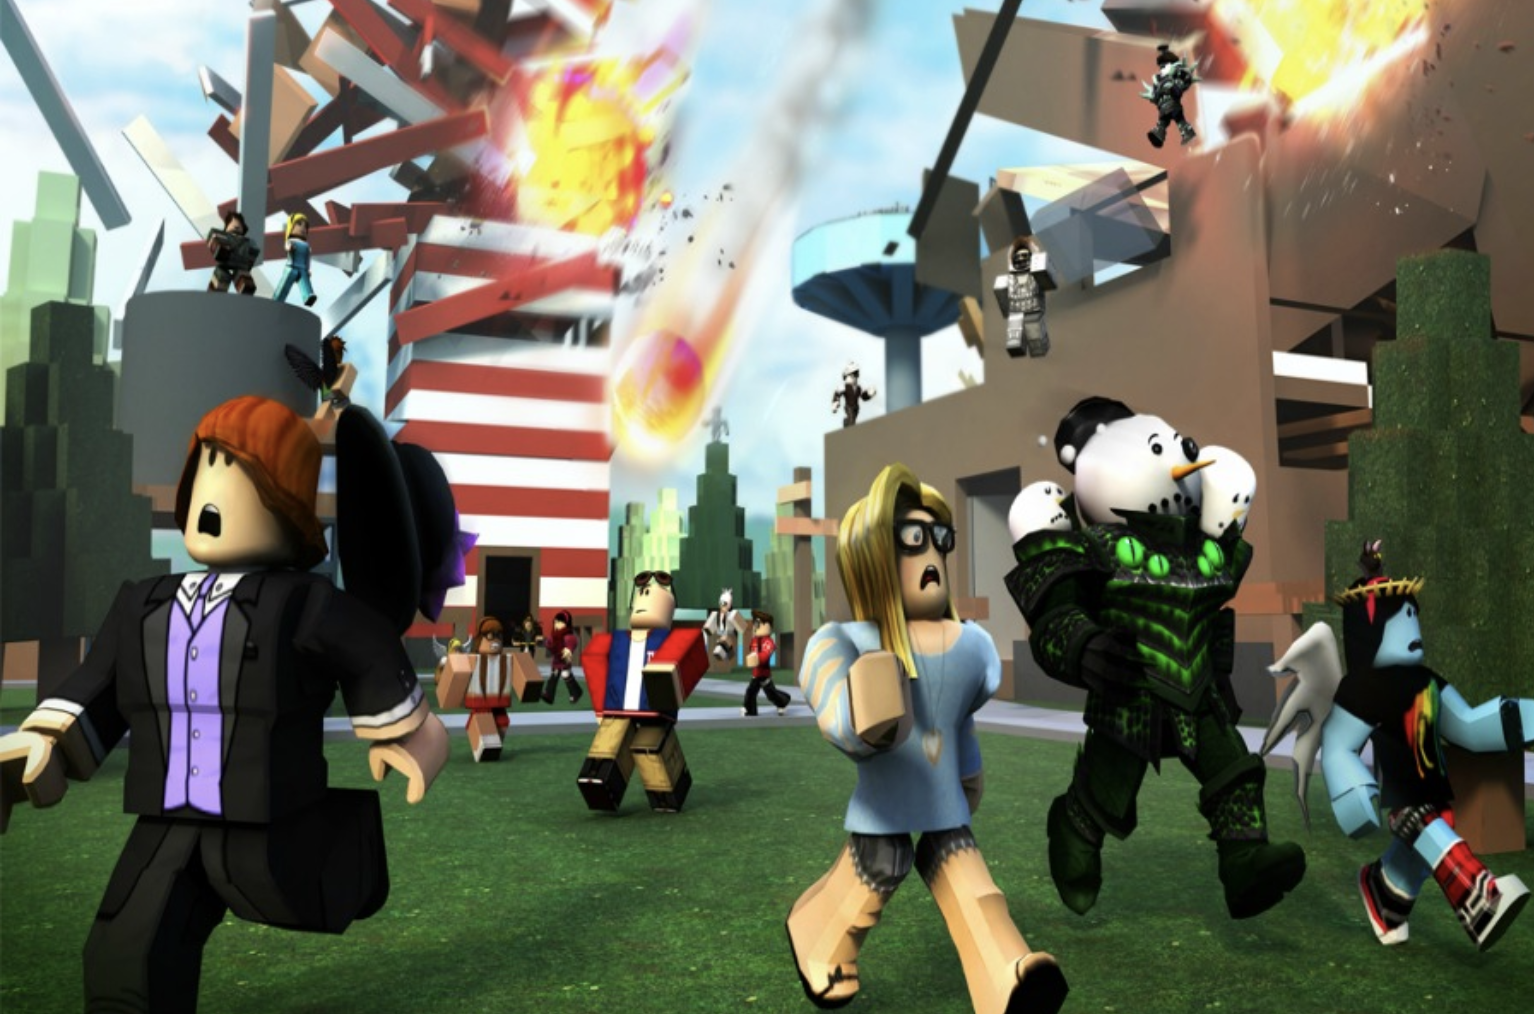 Gaming platforms like Roblox can lead to rabbit holes where sex predators,  extremists lurk: Experts